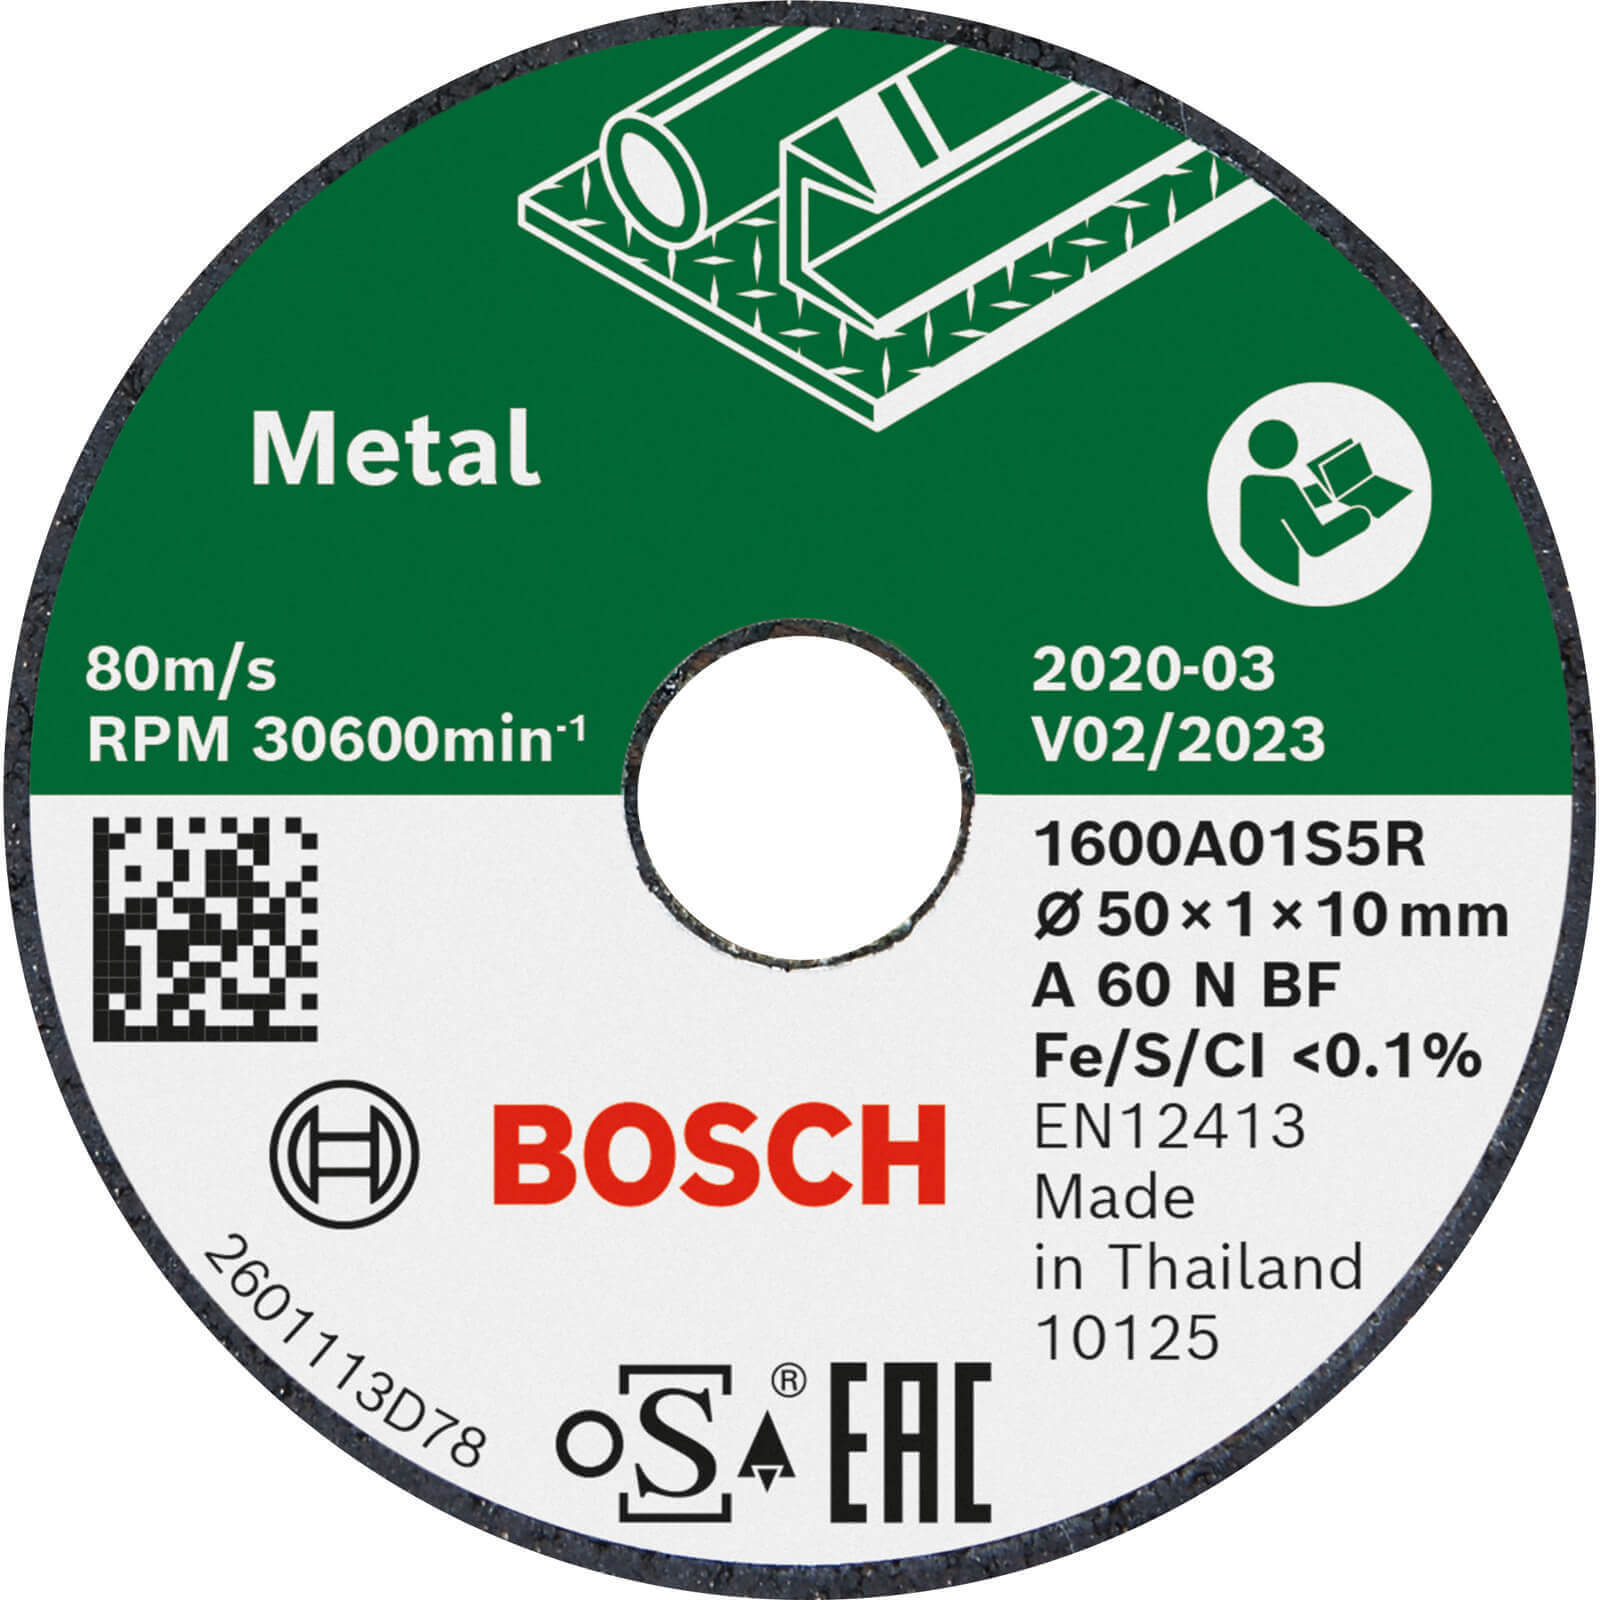 Photo of Bosch Bonded Cutting Disc For Easycut&grind 50mm 1mm Pack Of 3